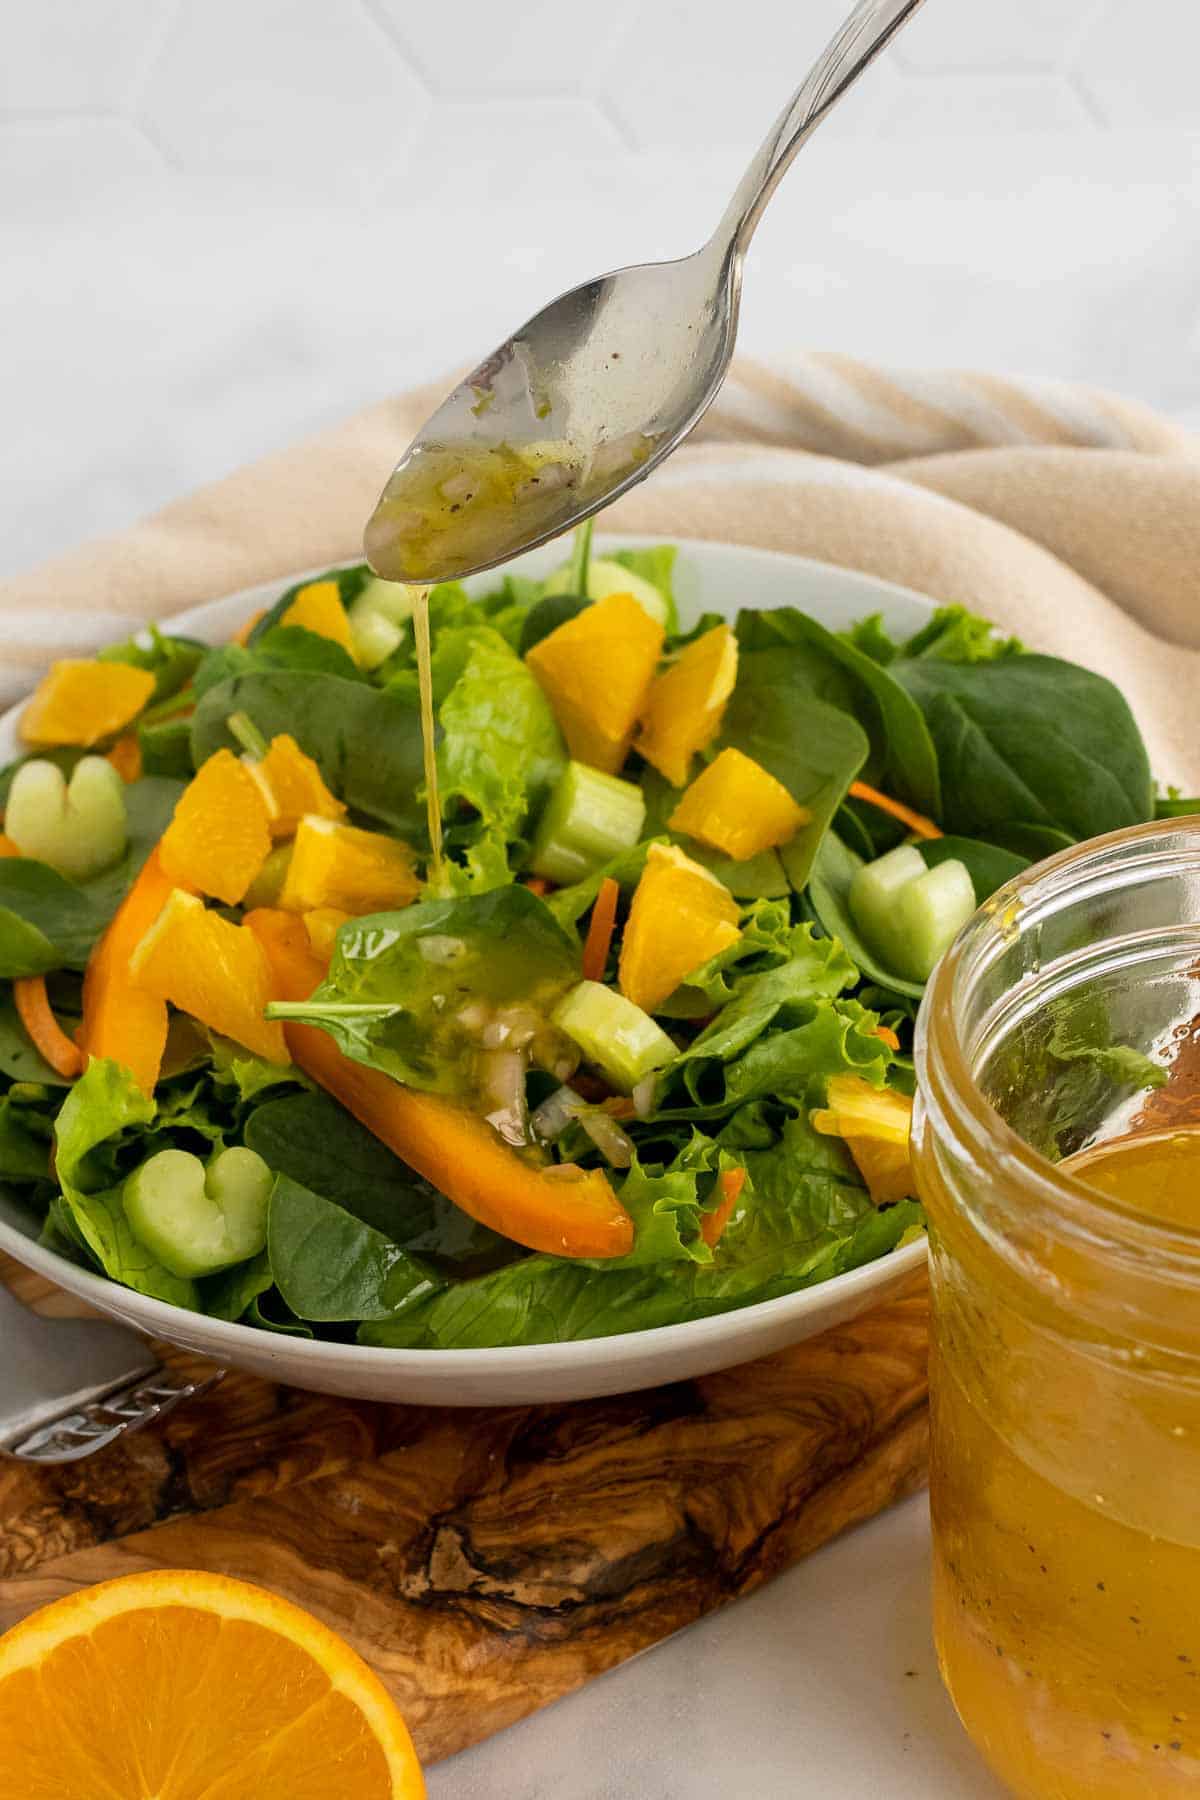 Spoon drizzling vinaigrette over a spinach salad